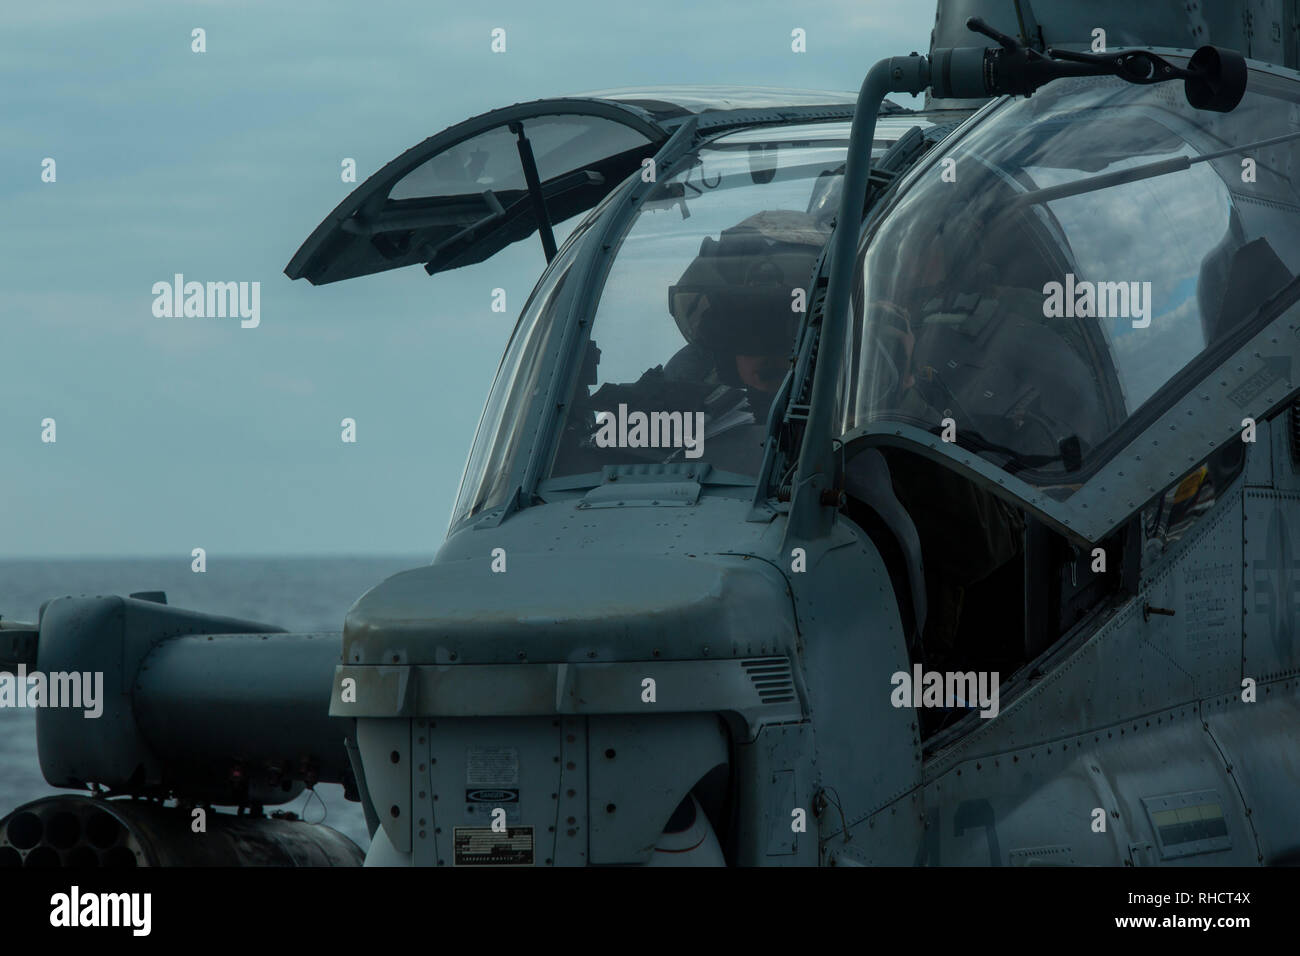 A Marine naval aviator with Marine Medium Tiltrotor Squadron 262 (Reinforced) performs pre-flight checks inside an AH-1Z Super Cobra helicopter atop the flight deck of the amphibious transport dock USS Green Bay (LPD 20) during flight operations at sea, Jan. 19, 2019. VMM-262 (Rein.) is the Aviation Combat Element for the 31st Marine Expeditionary Unit. The 31st MEU, the Marine Corps’ only continuously forward-deployed MEU partnering with the Wasp Amphibious Ready Group, provides a flexible and lethal force ready to perform a wide range of military operations as the premier crisis response for Stock Photo